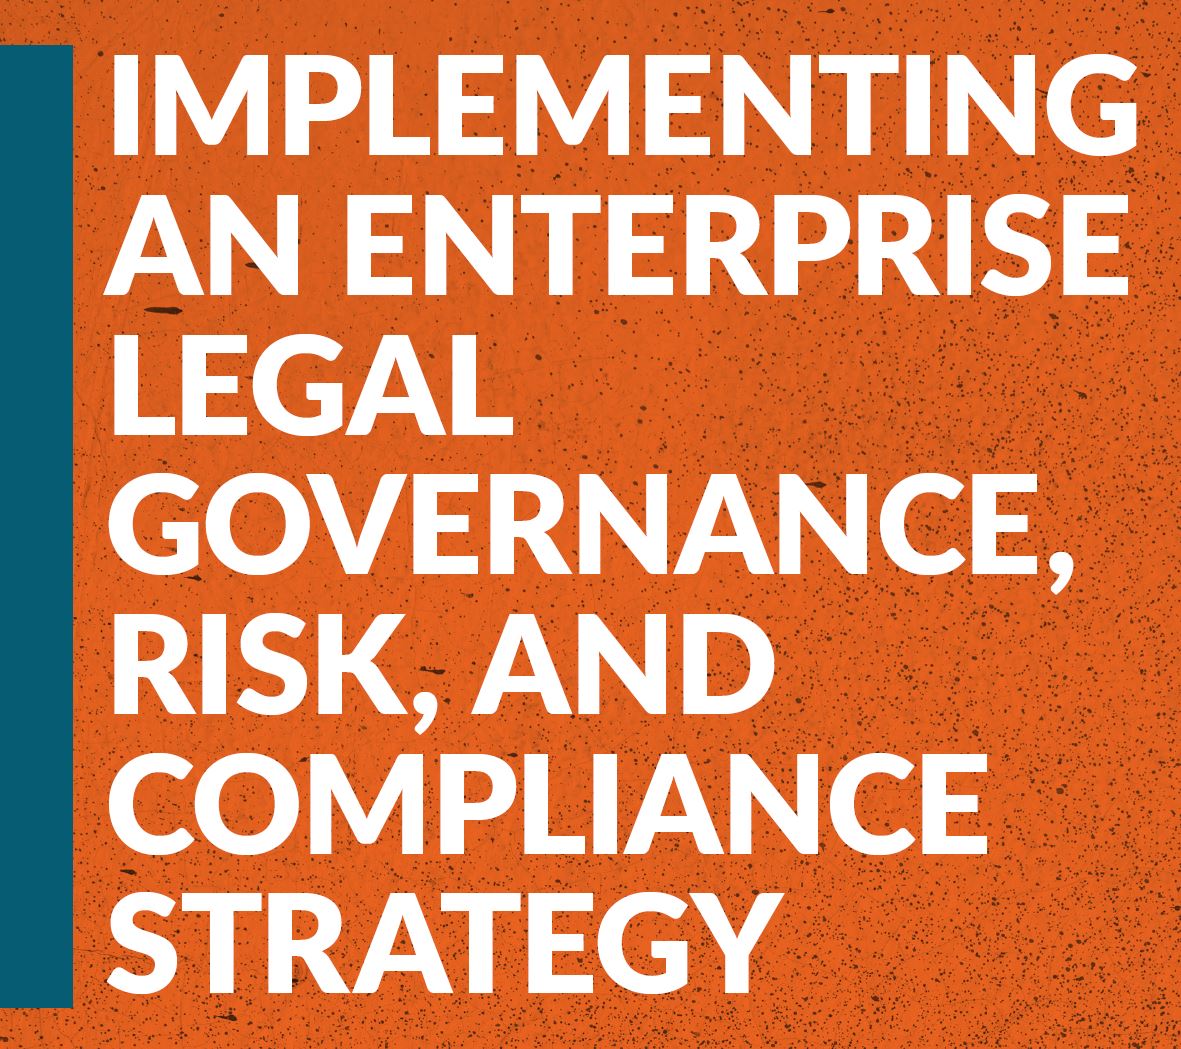 Implementing an Enterprise Legal Governance, Risk, and Compliance Strategy  | Association of Corporate Counsel (ACC)